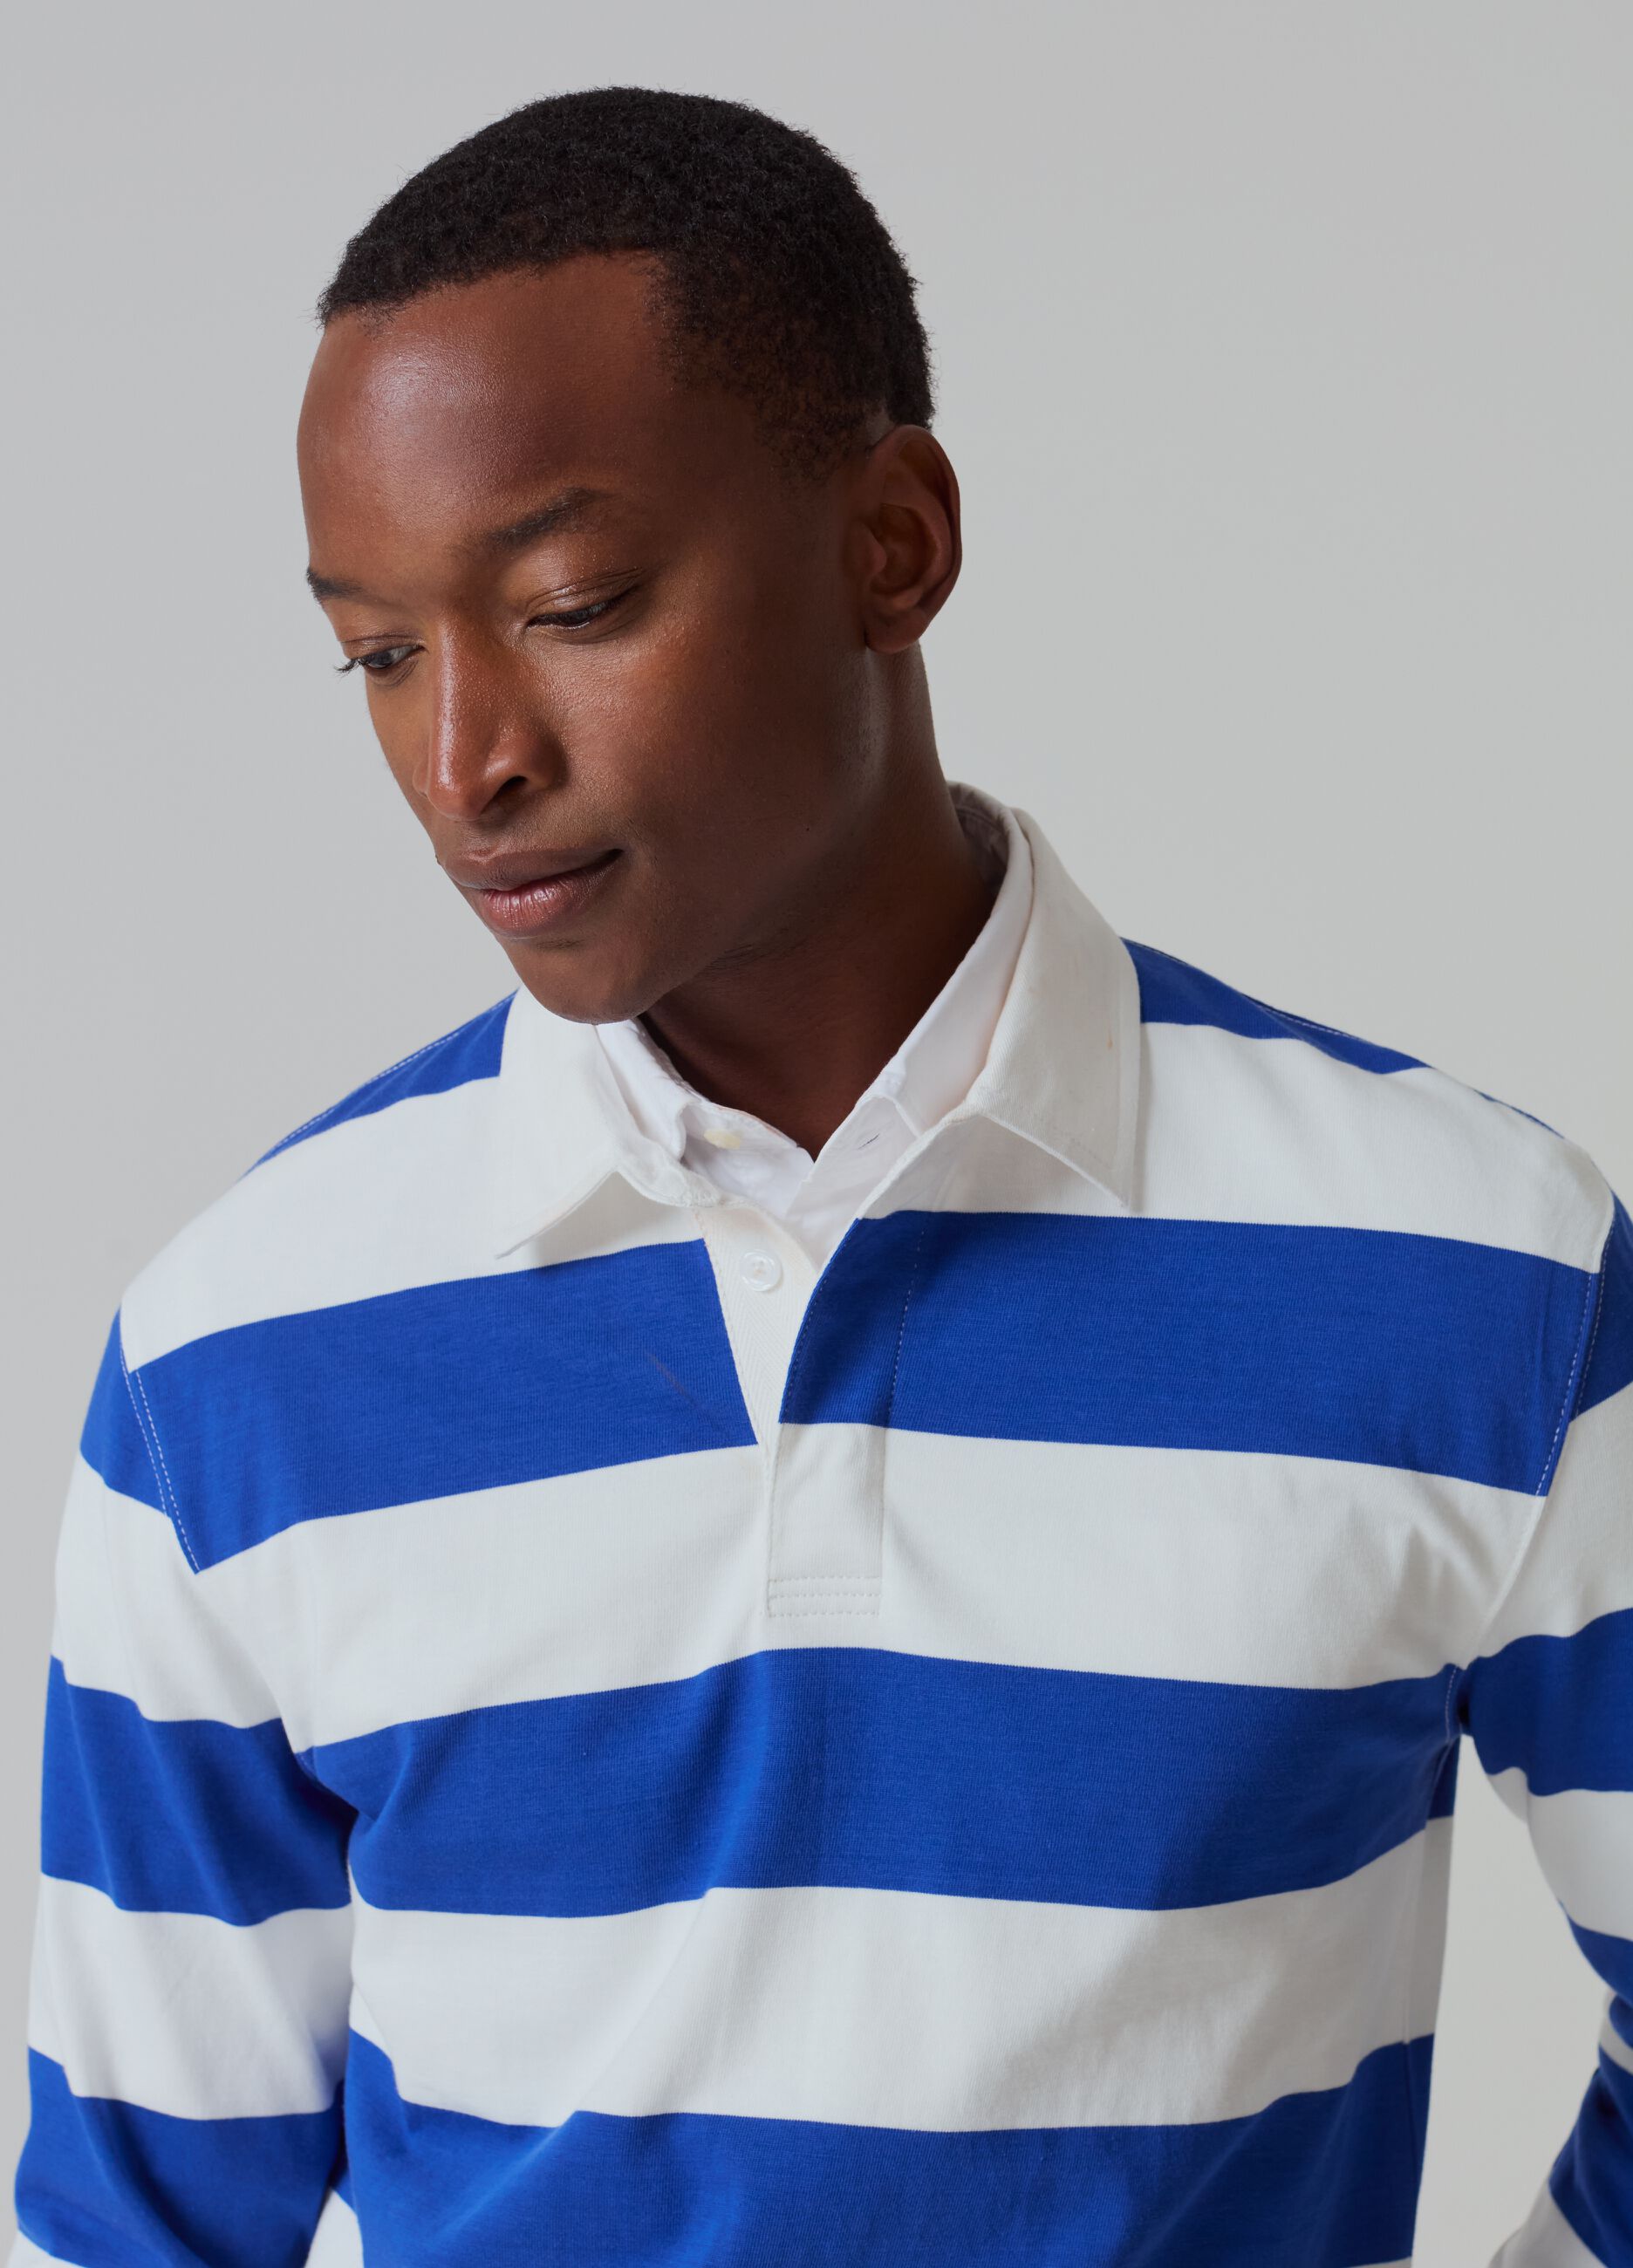 Striped polo shirt with long sleeves